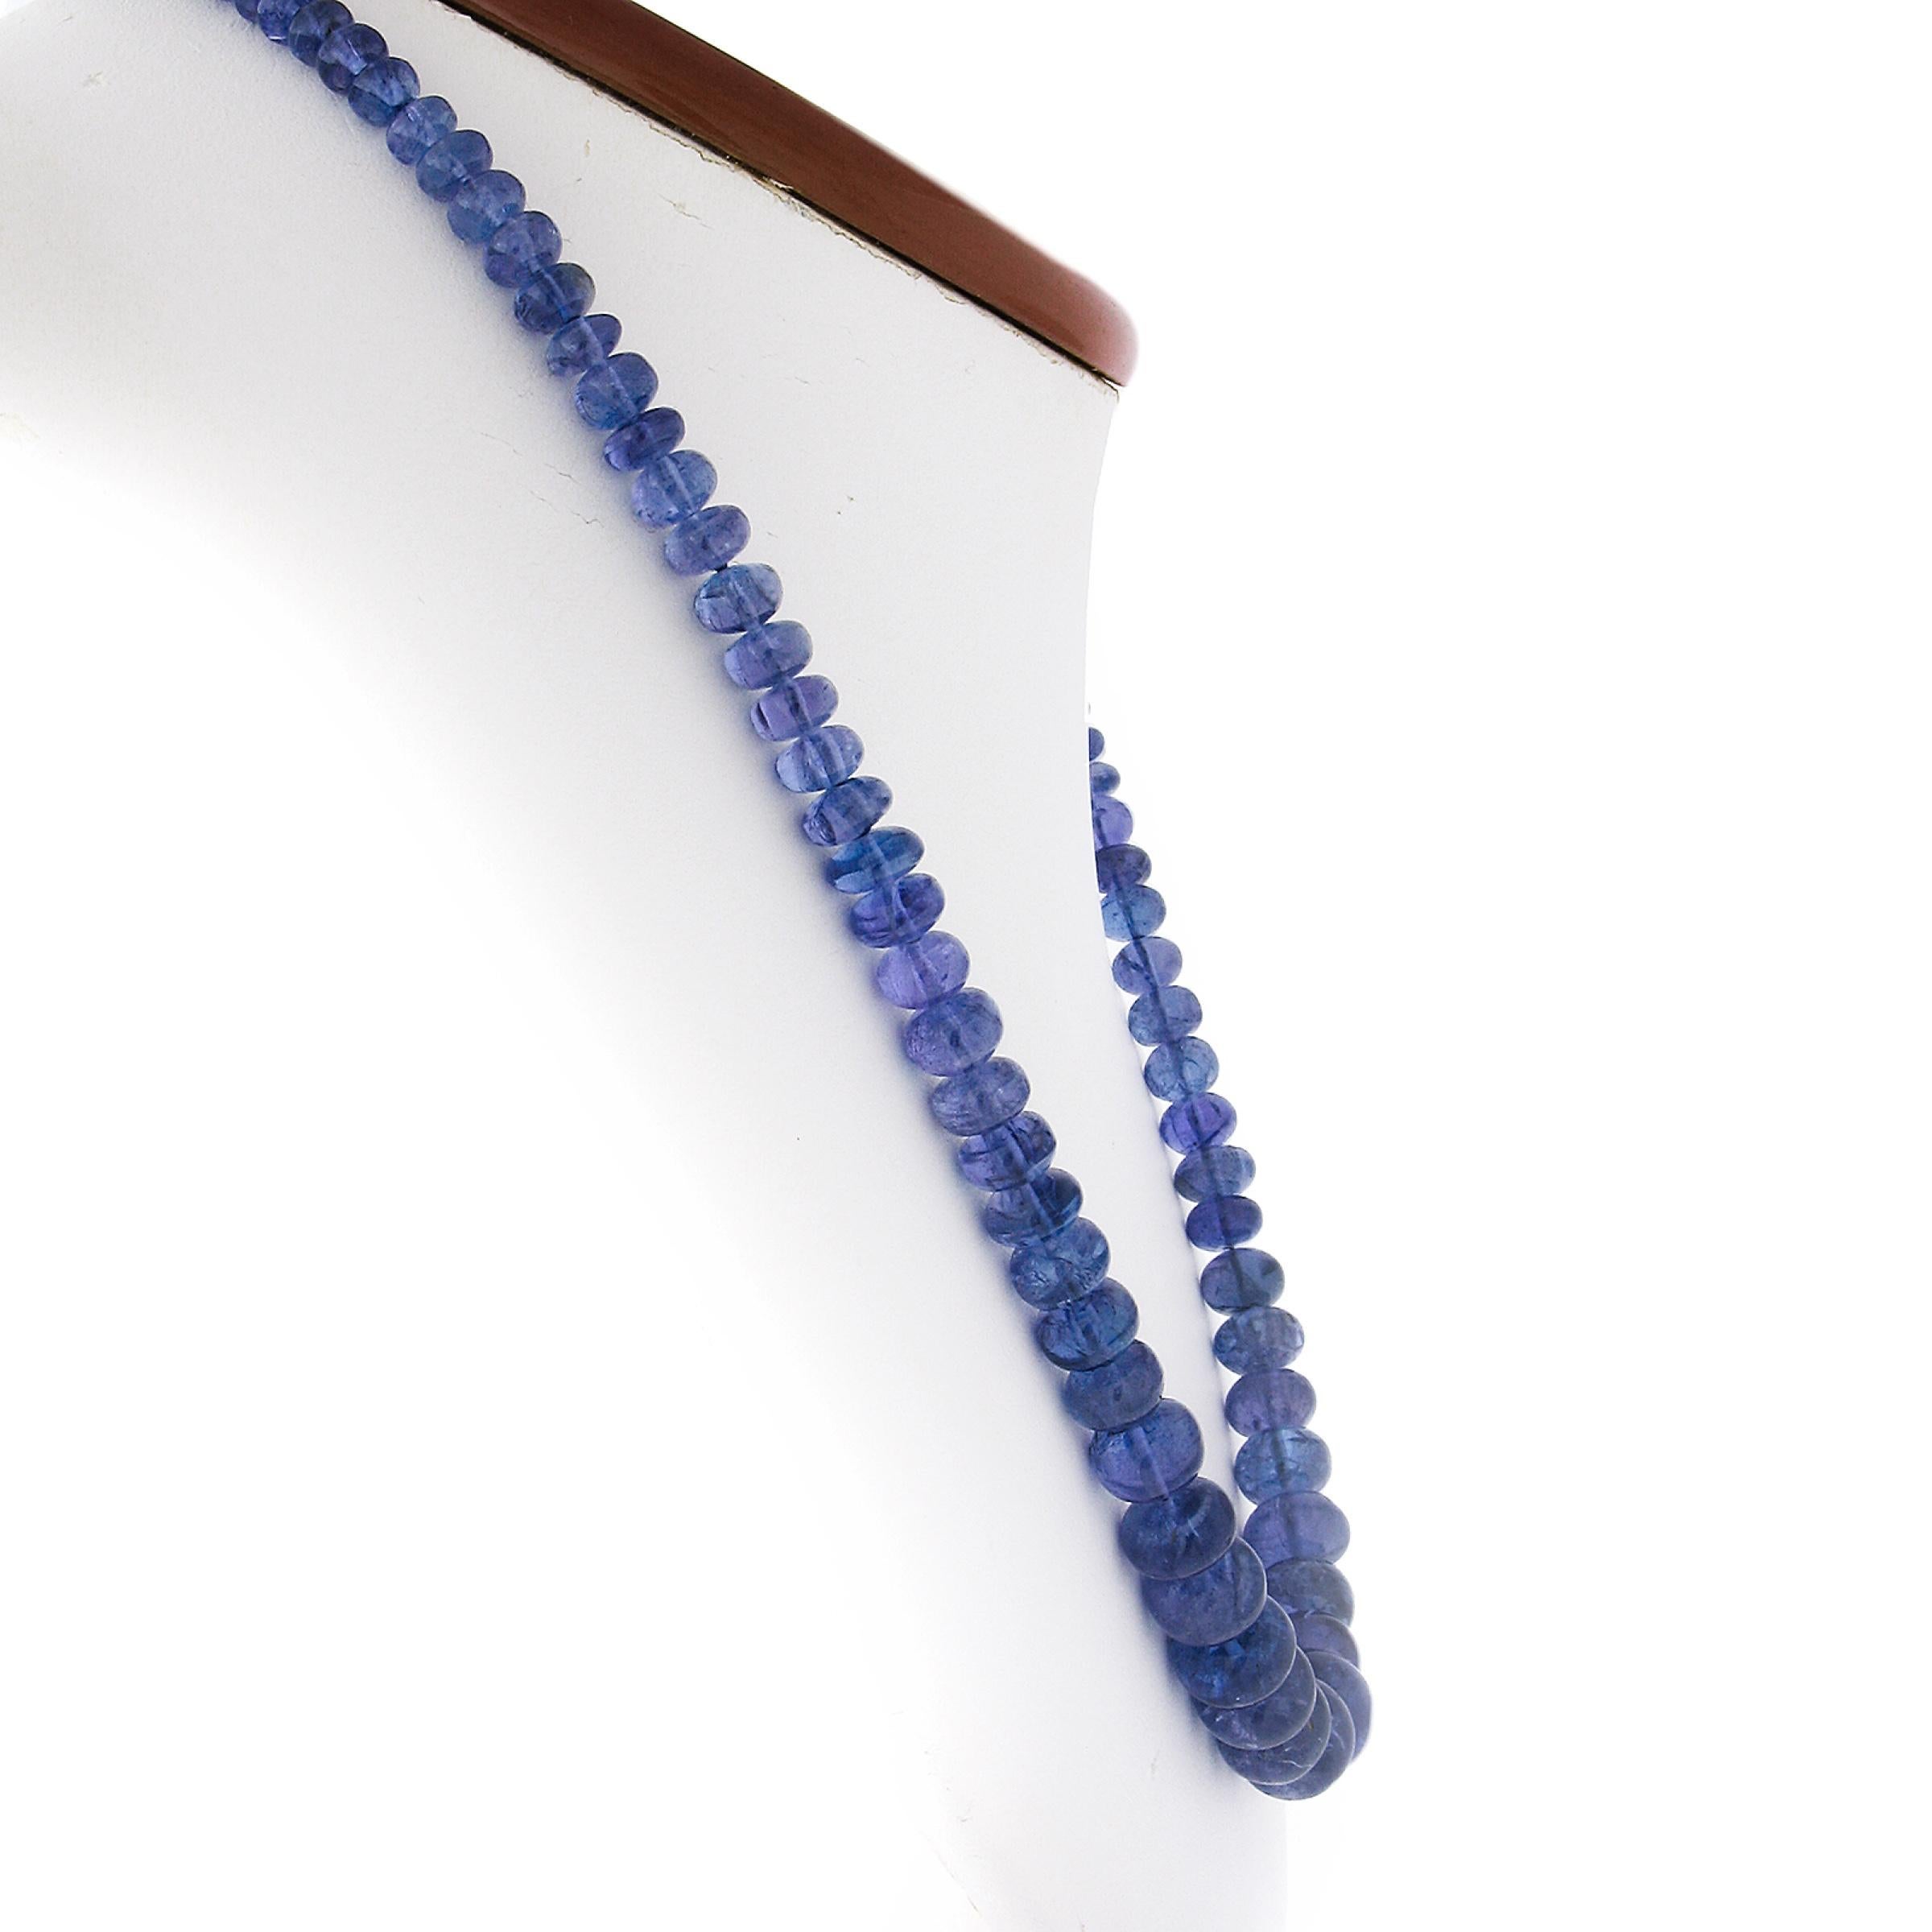 GIA Rondelle Beads Tanzanite Graduated Strand Necklace w/ 14k Gold Chain & Clasp In Excellent Condition For Sale In Montclair, NJ